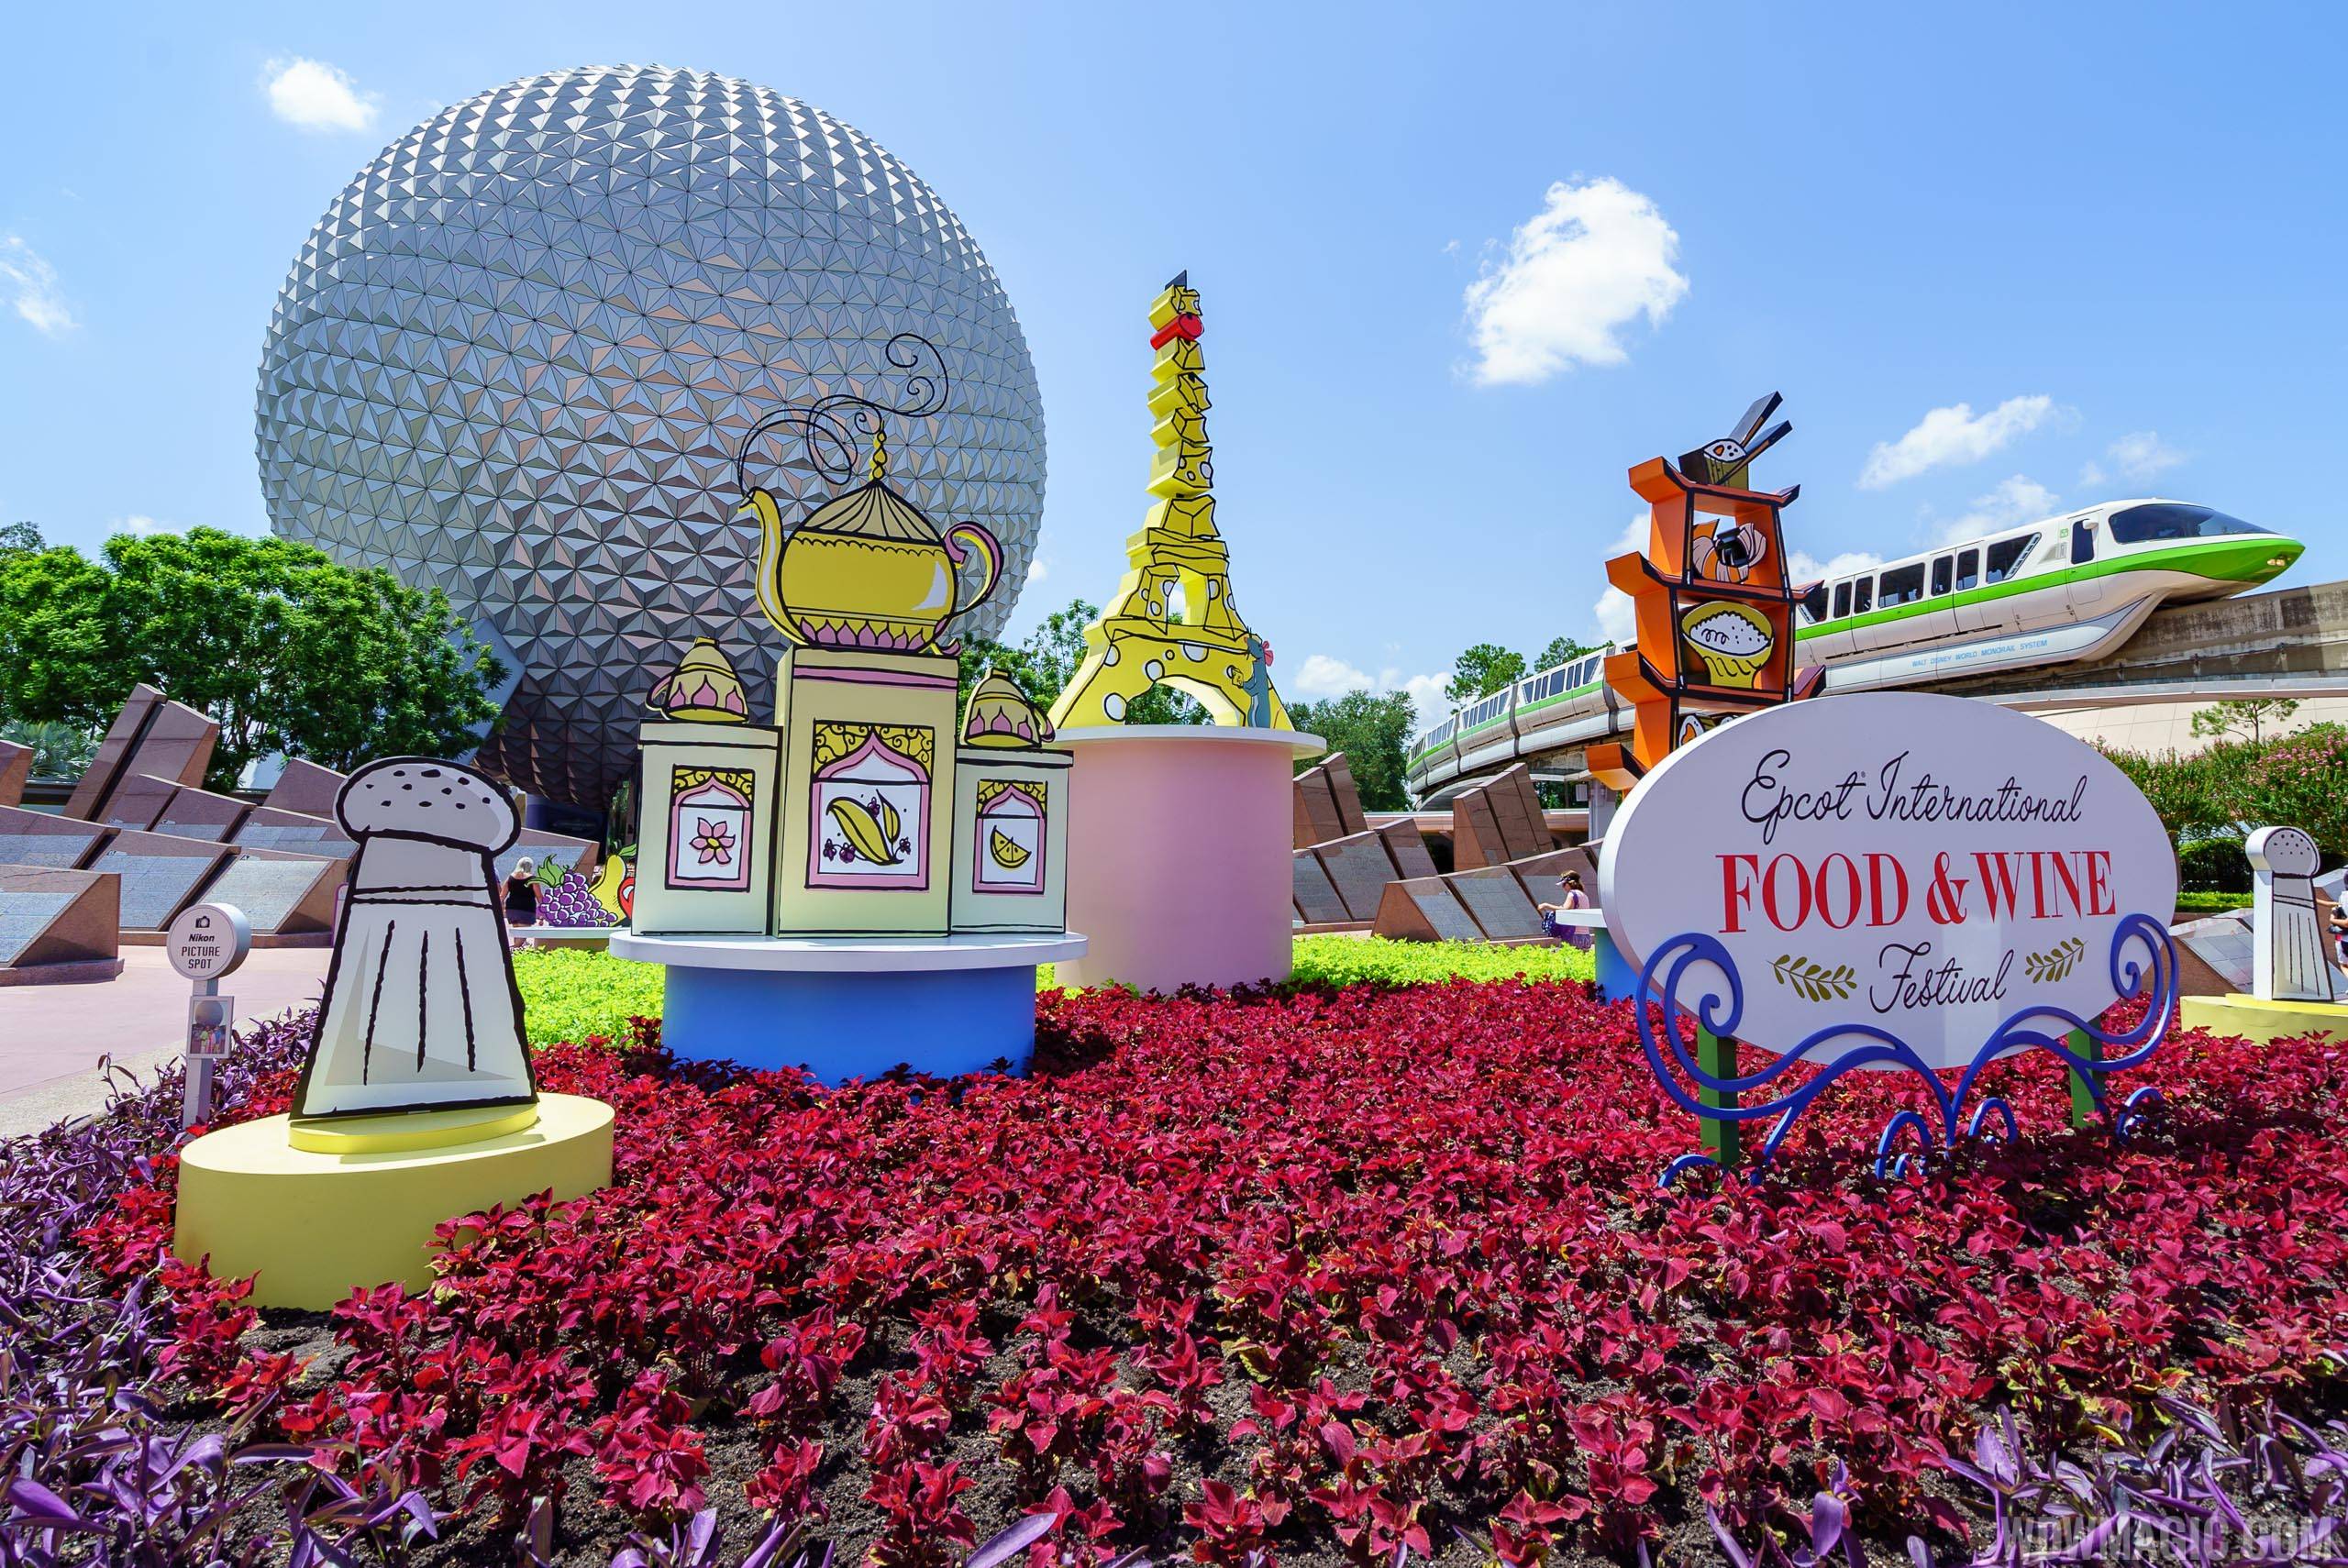 PHOTOS - The 22nd Epcot International Food and Wine Festival begins today